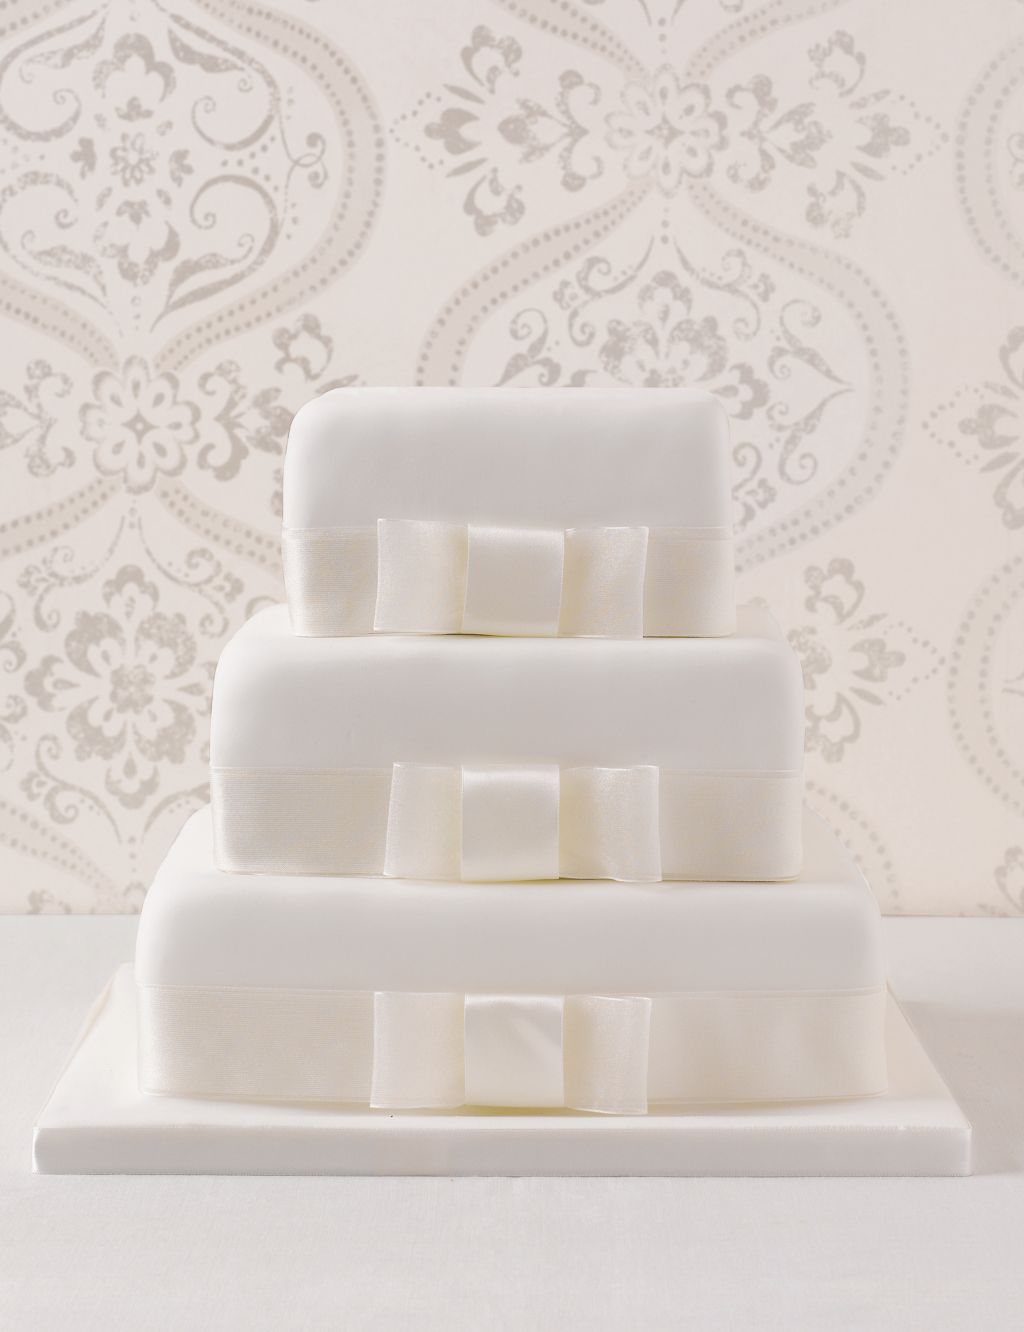 3 Tier Elegant Wedding Cake - Assorted Flavours with Lemon (Serves 190) Last order date 26th March 1 of 5